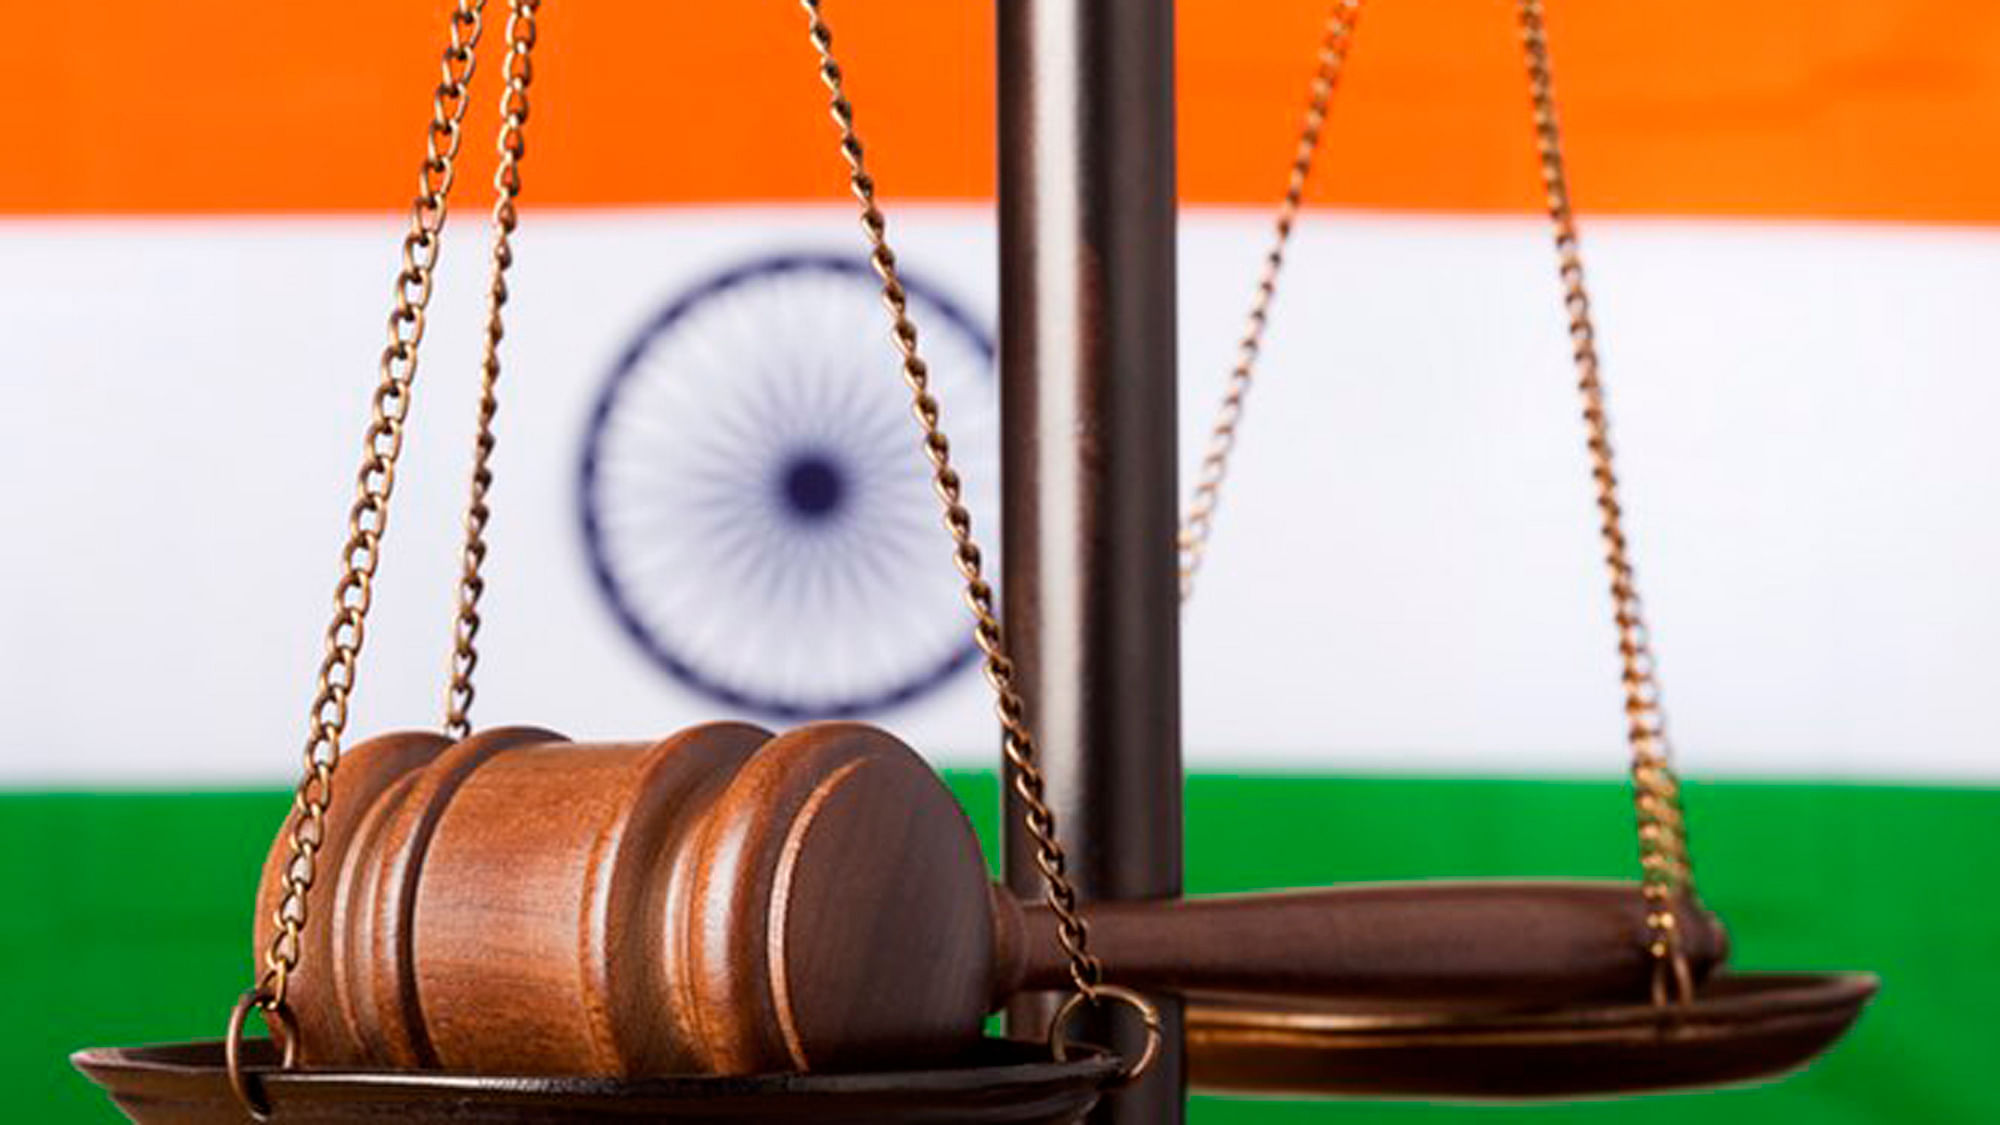 The Supreme Court put the “Collegium System” in place in 1993. Picture used for representation purpose only. (Photo: iStockphoto)